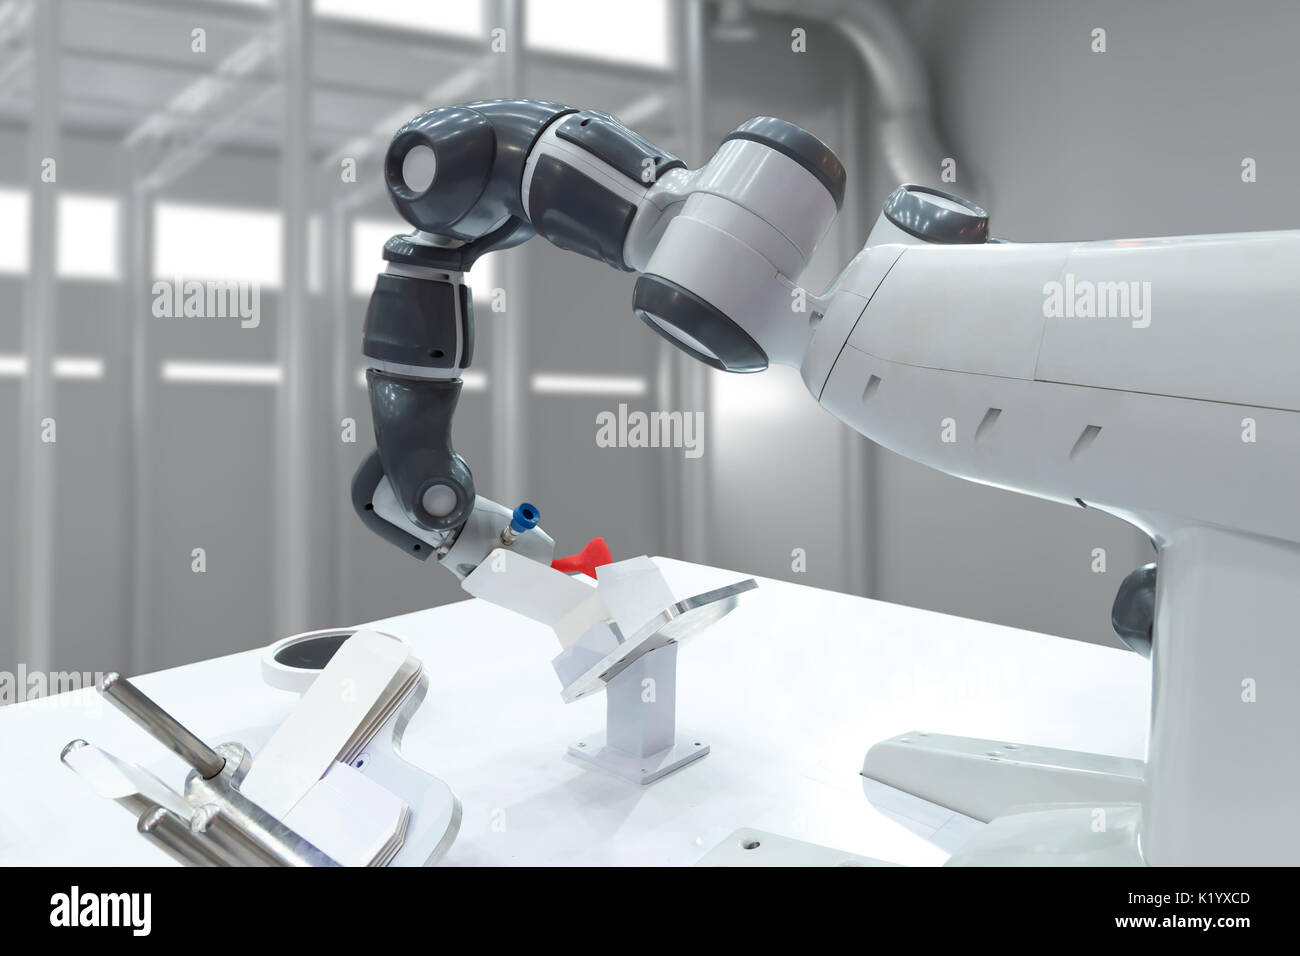 Industrial Folding box automation machine robot arm technology in smart factory. Industry 4th internet of things concept. Stock Photo